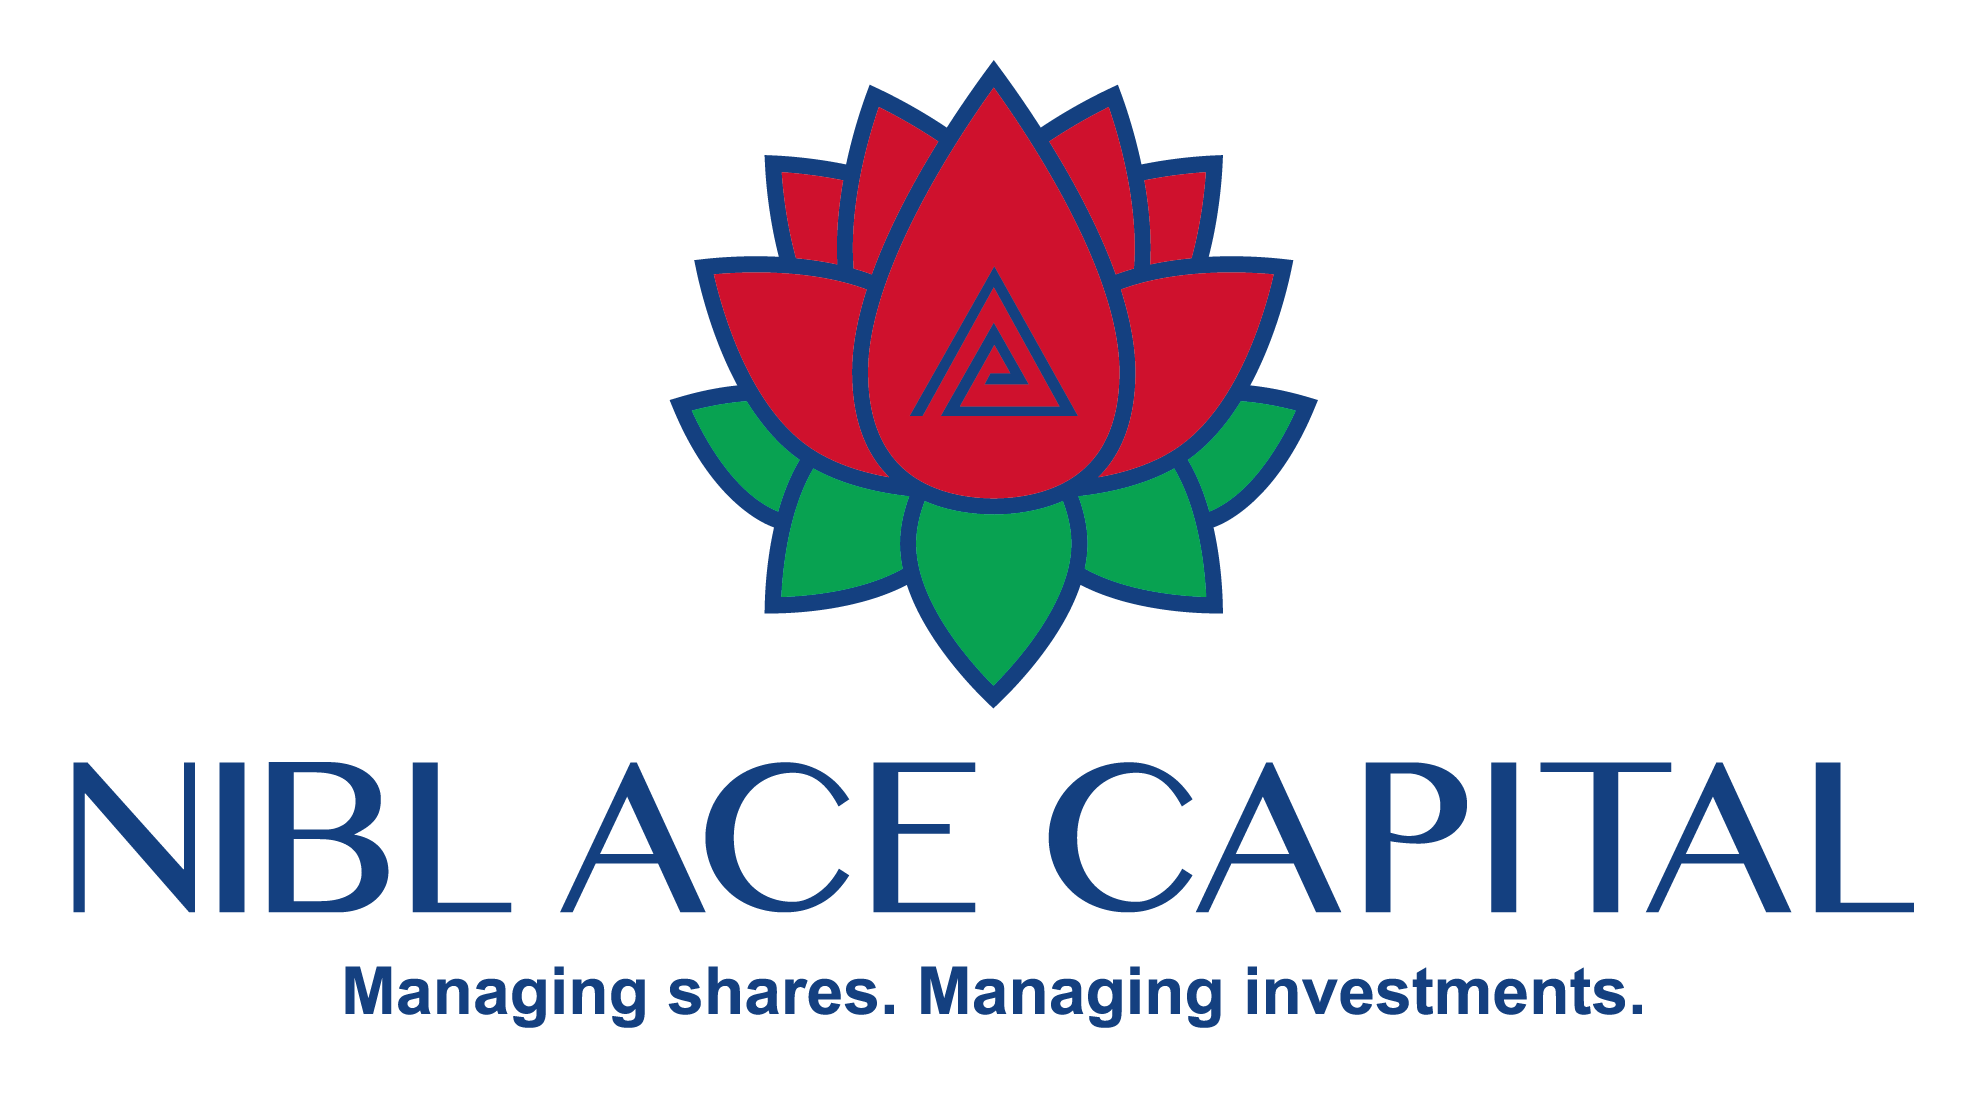 NIBL Ace Capital signed Roadmap for an IPO agreement